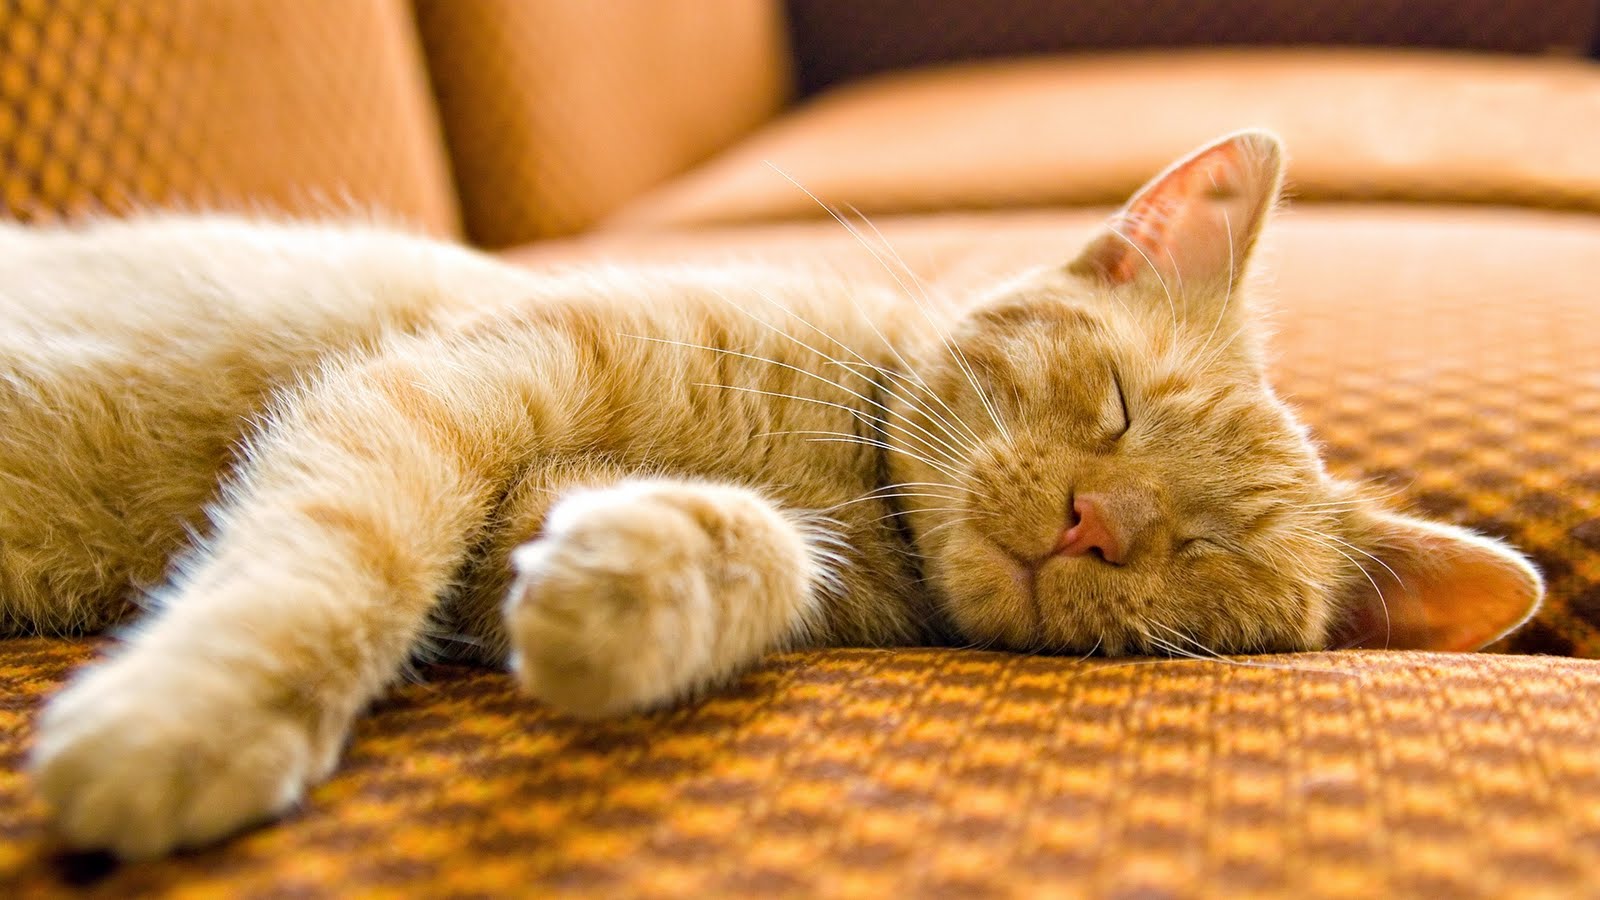 Yellow Cat Sleeping On Couch HD Wallpaper Epic Desktop Background